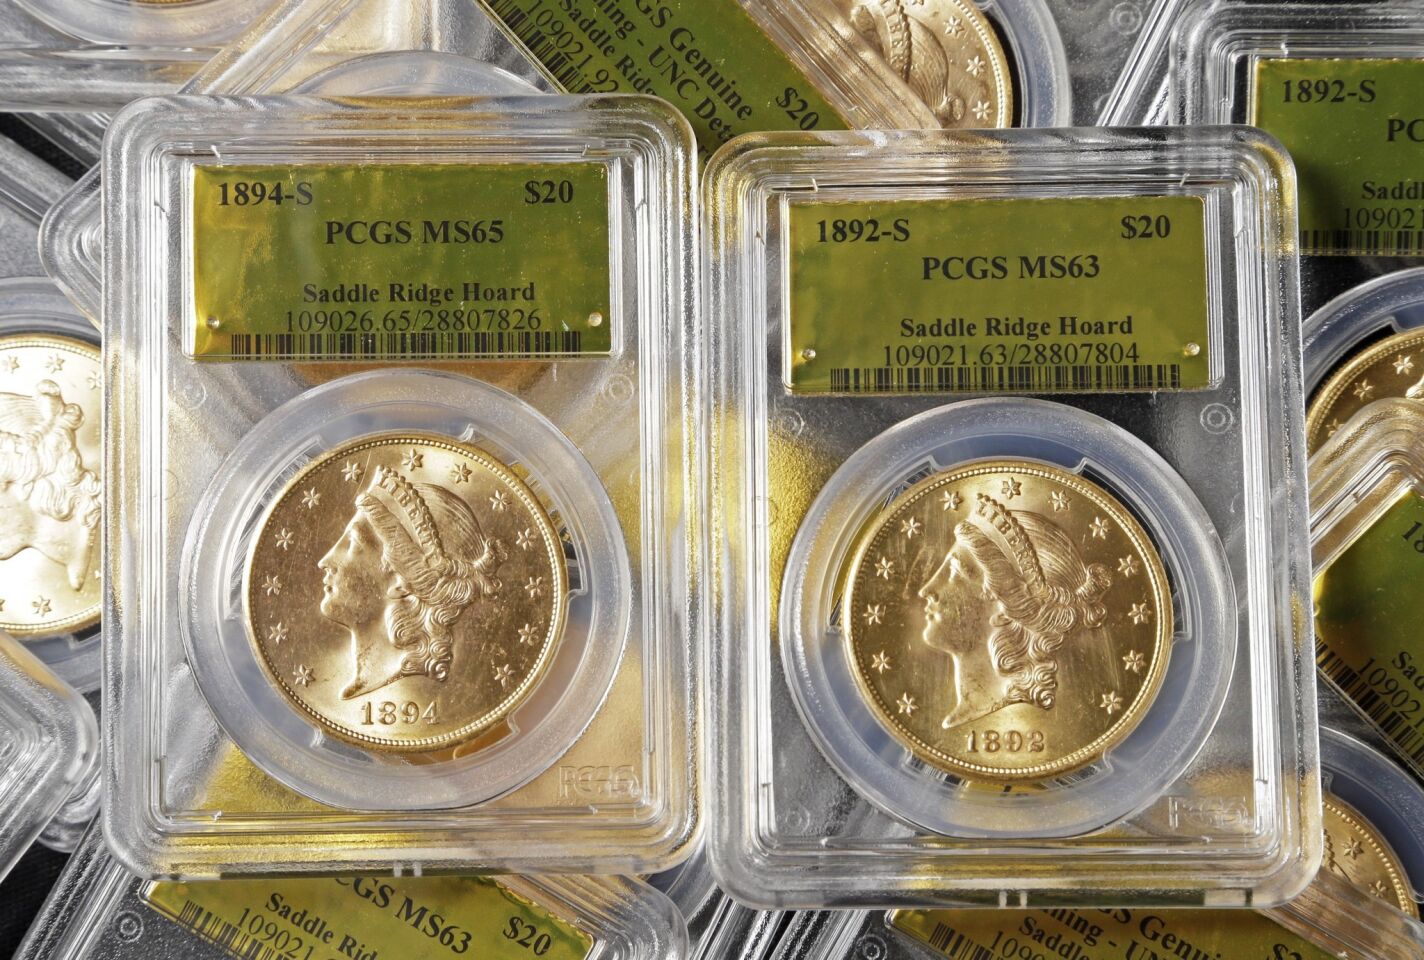 The face value of the gold pieces found by a couple on their property in California's gold country adds up to about $28,000, but some of the coins could fetch nearly $1 million apiece, experts say.